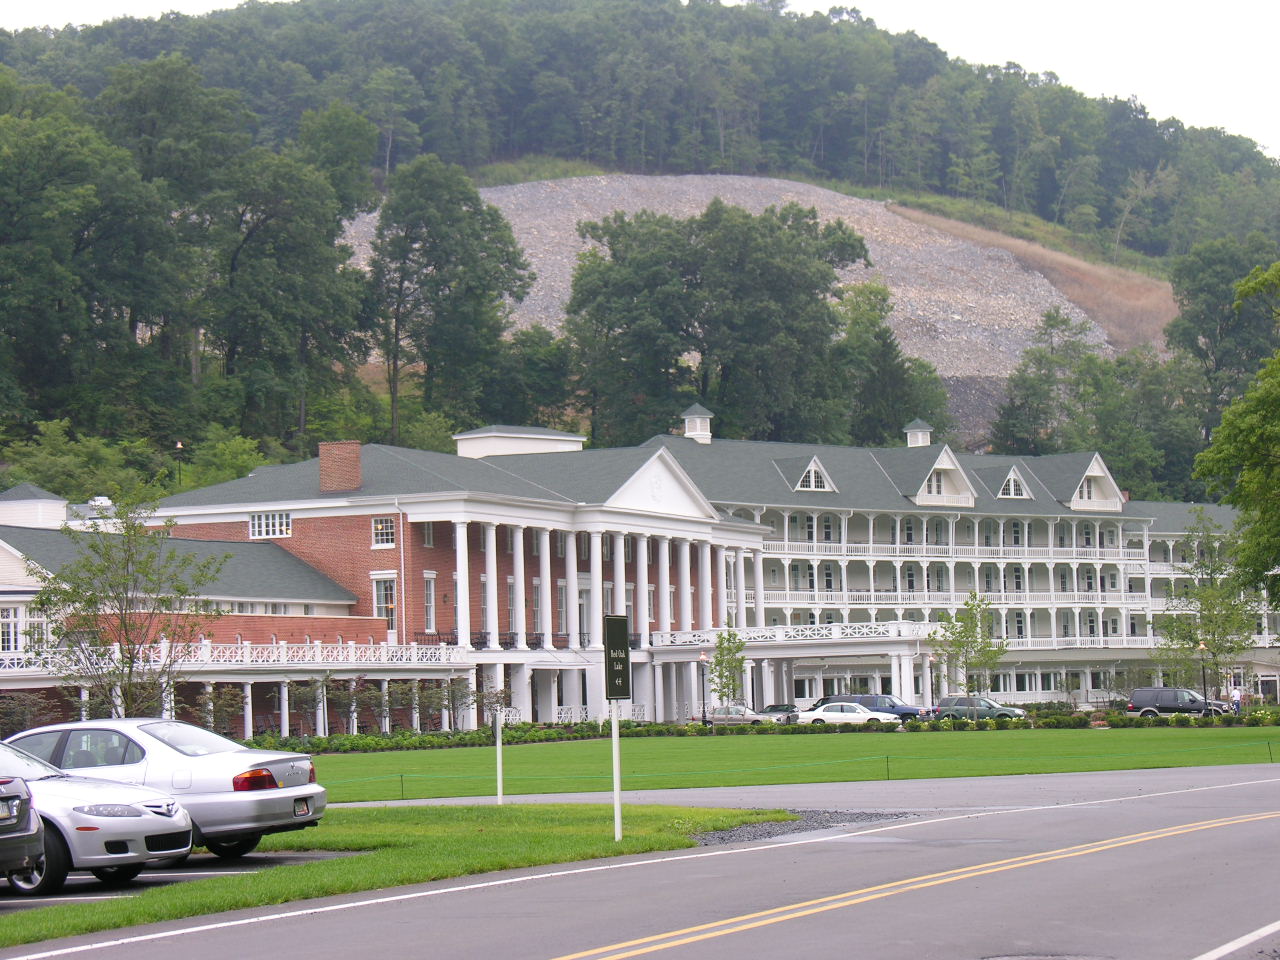 This photograph is of the exterior main facade of the Bedford Springs Hotel.